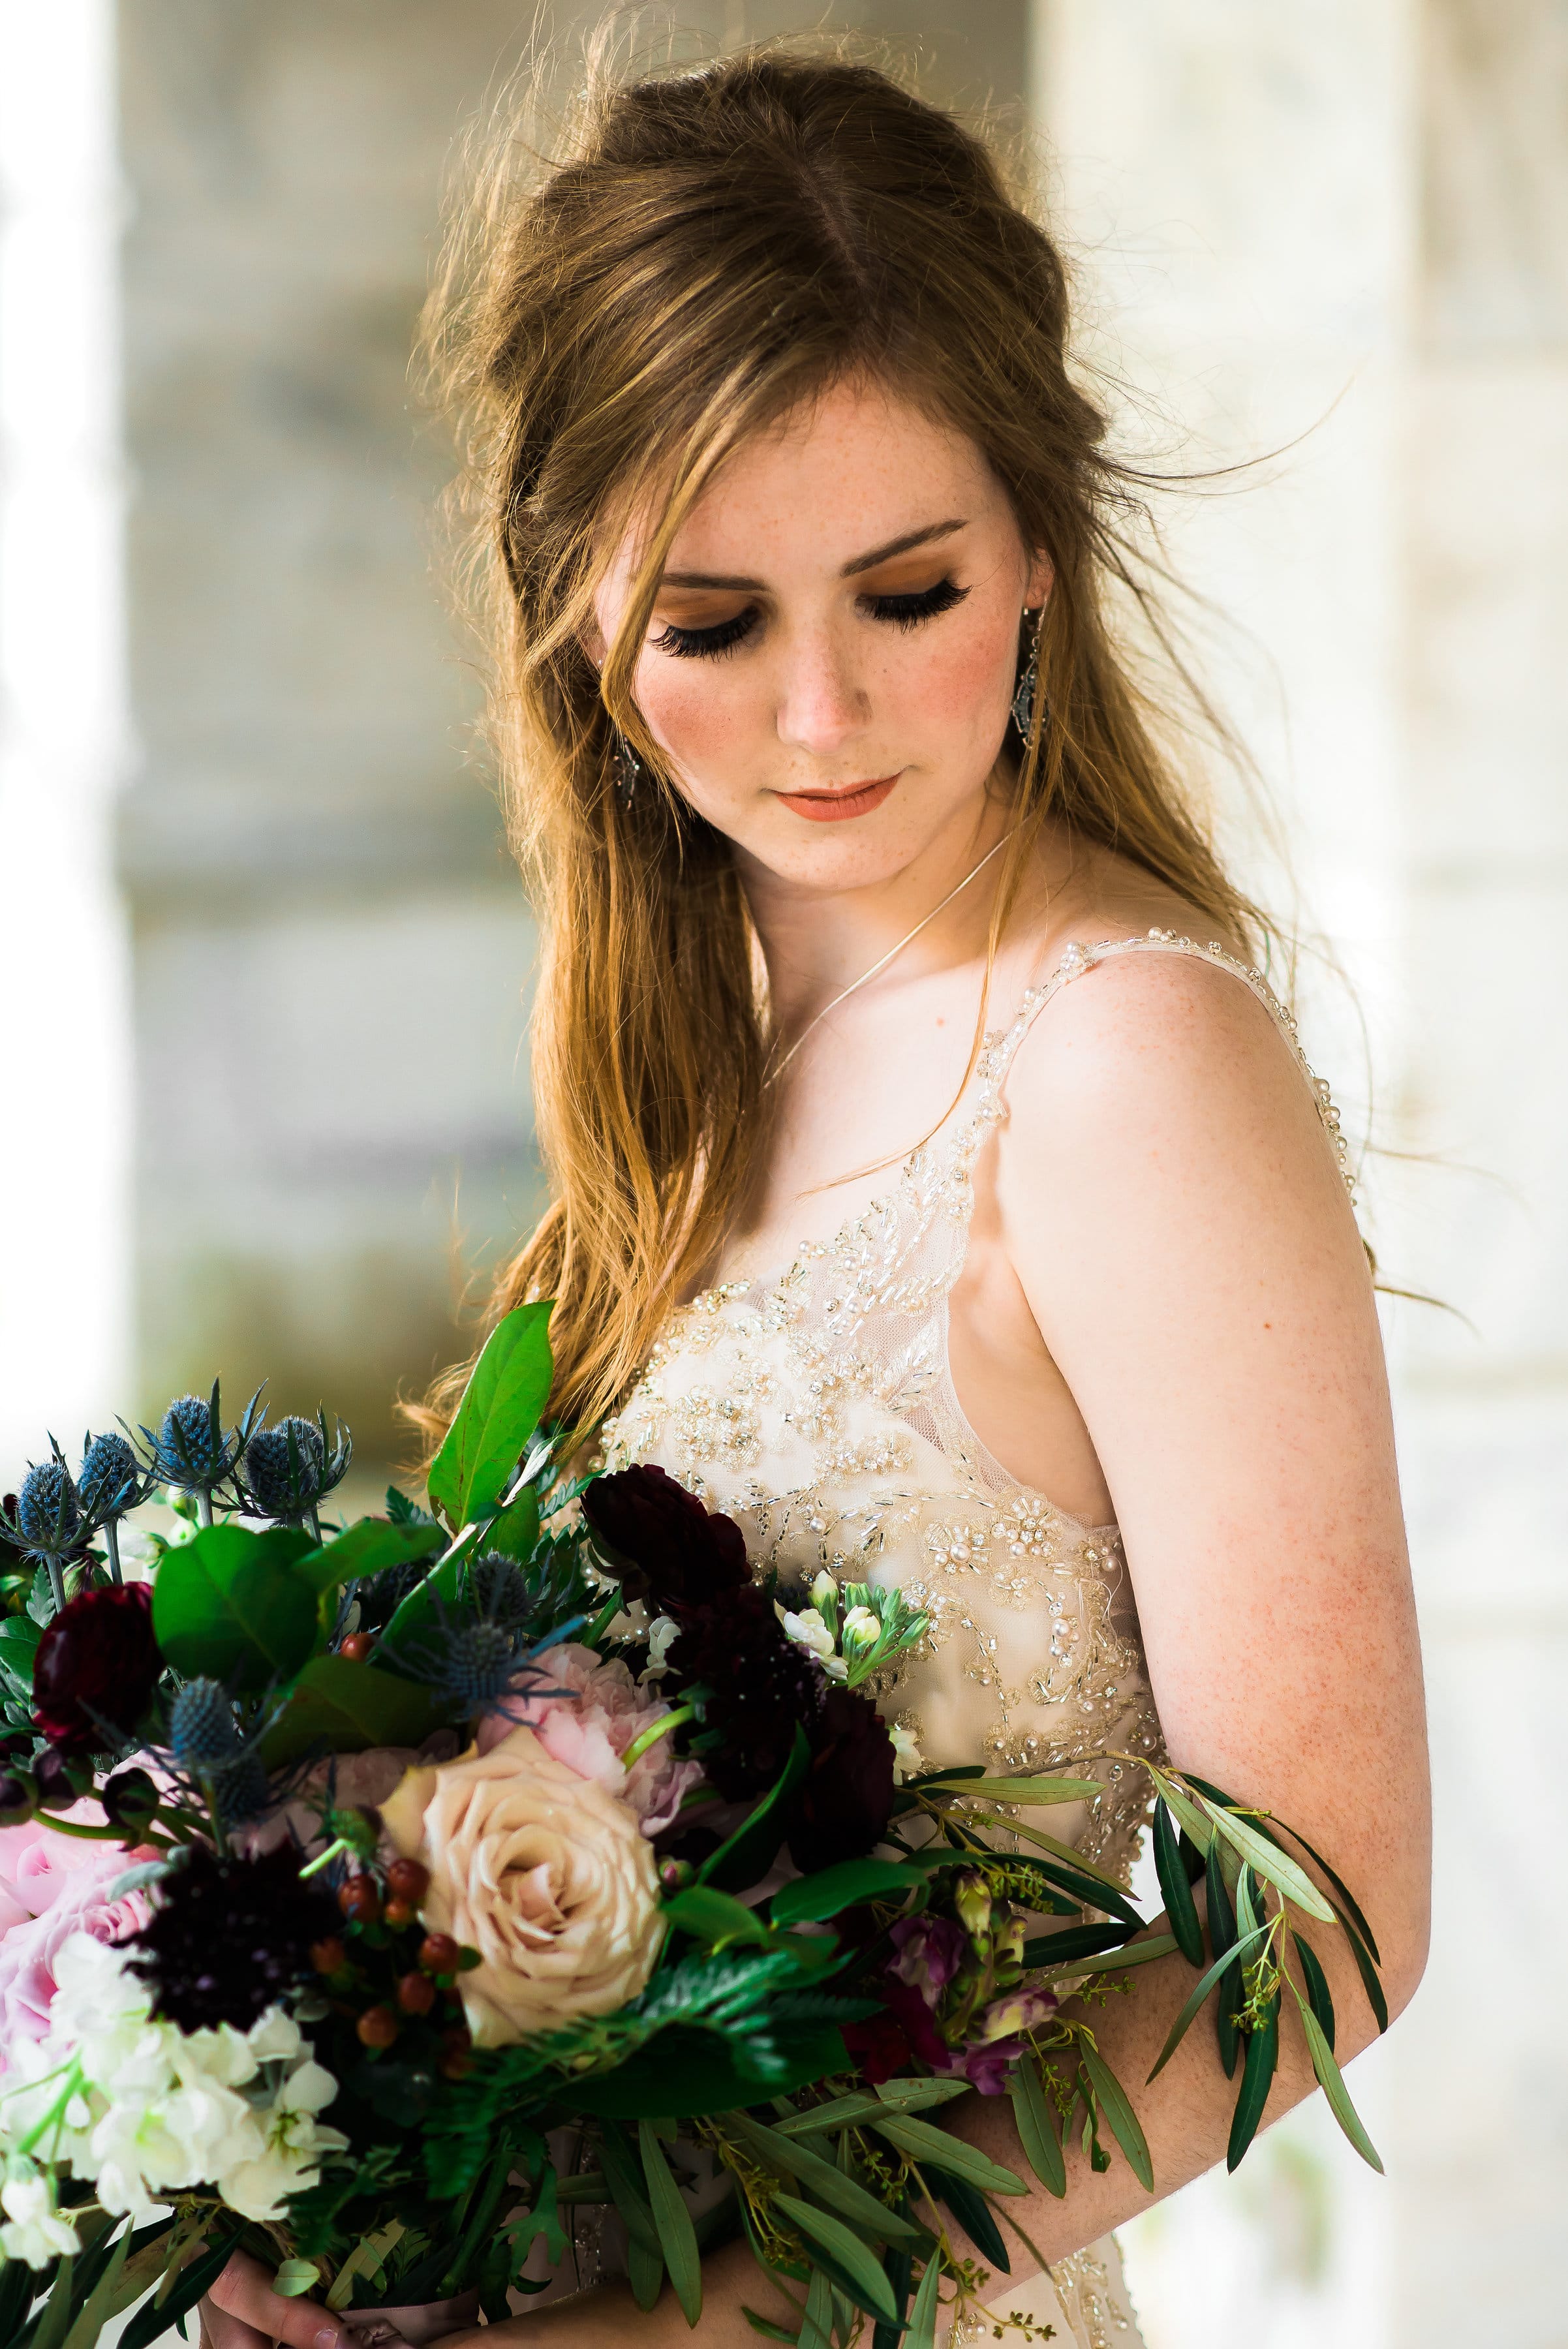 Romantic Styled Shoot with Jewel Tones and Vintage Wedding Dress